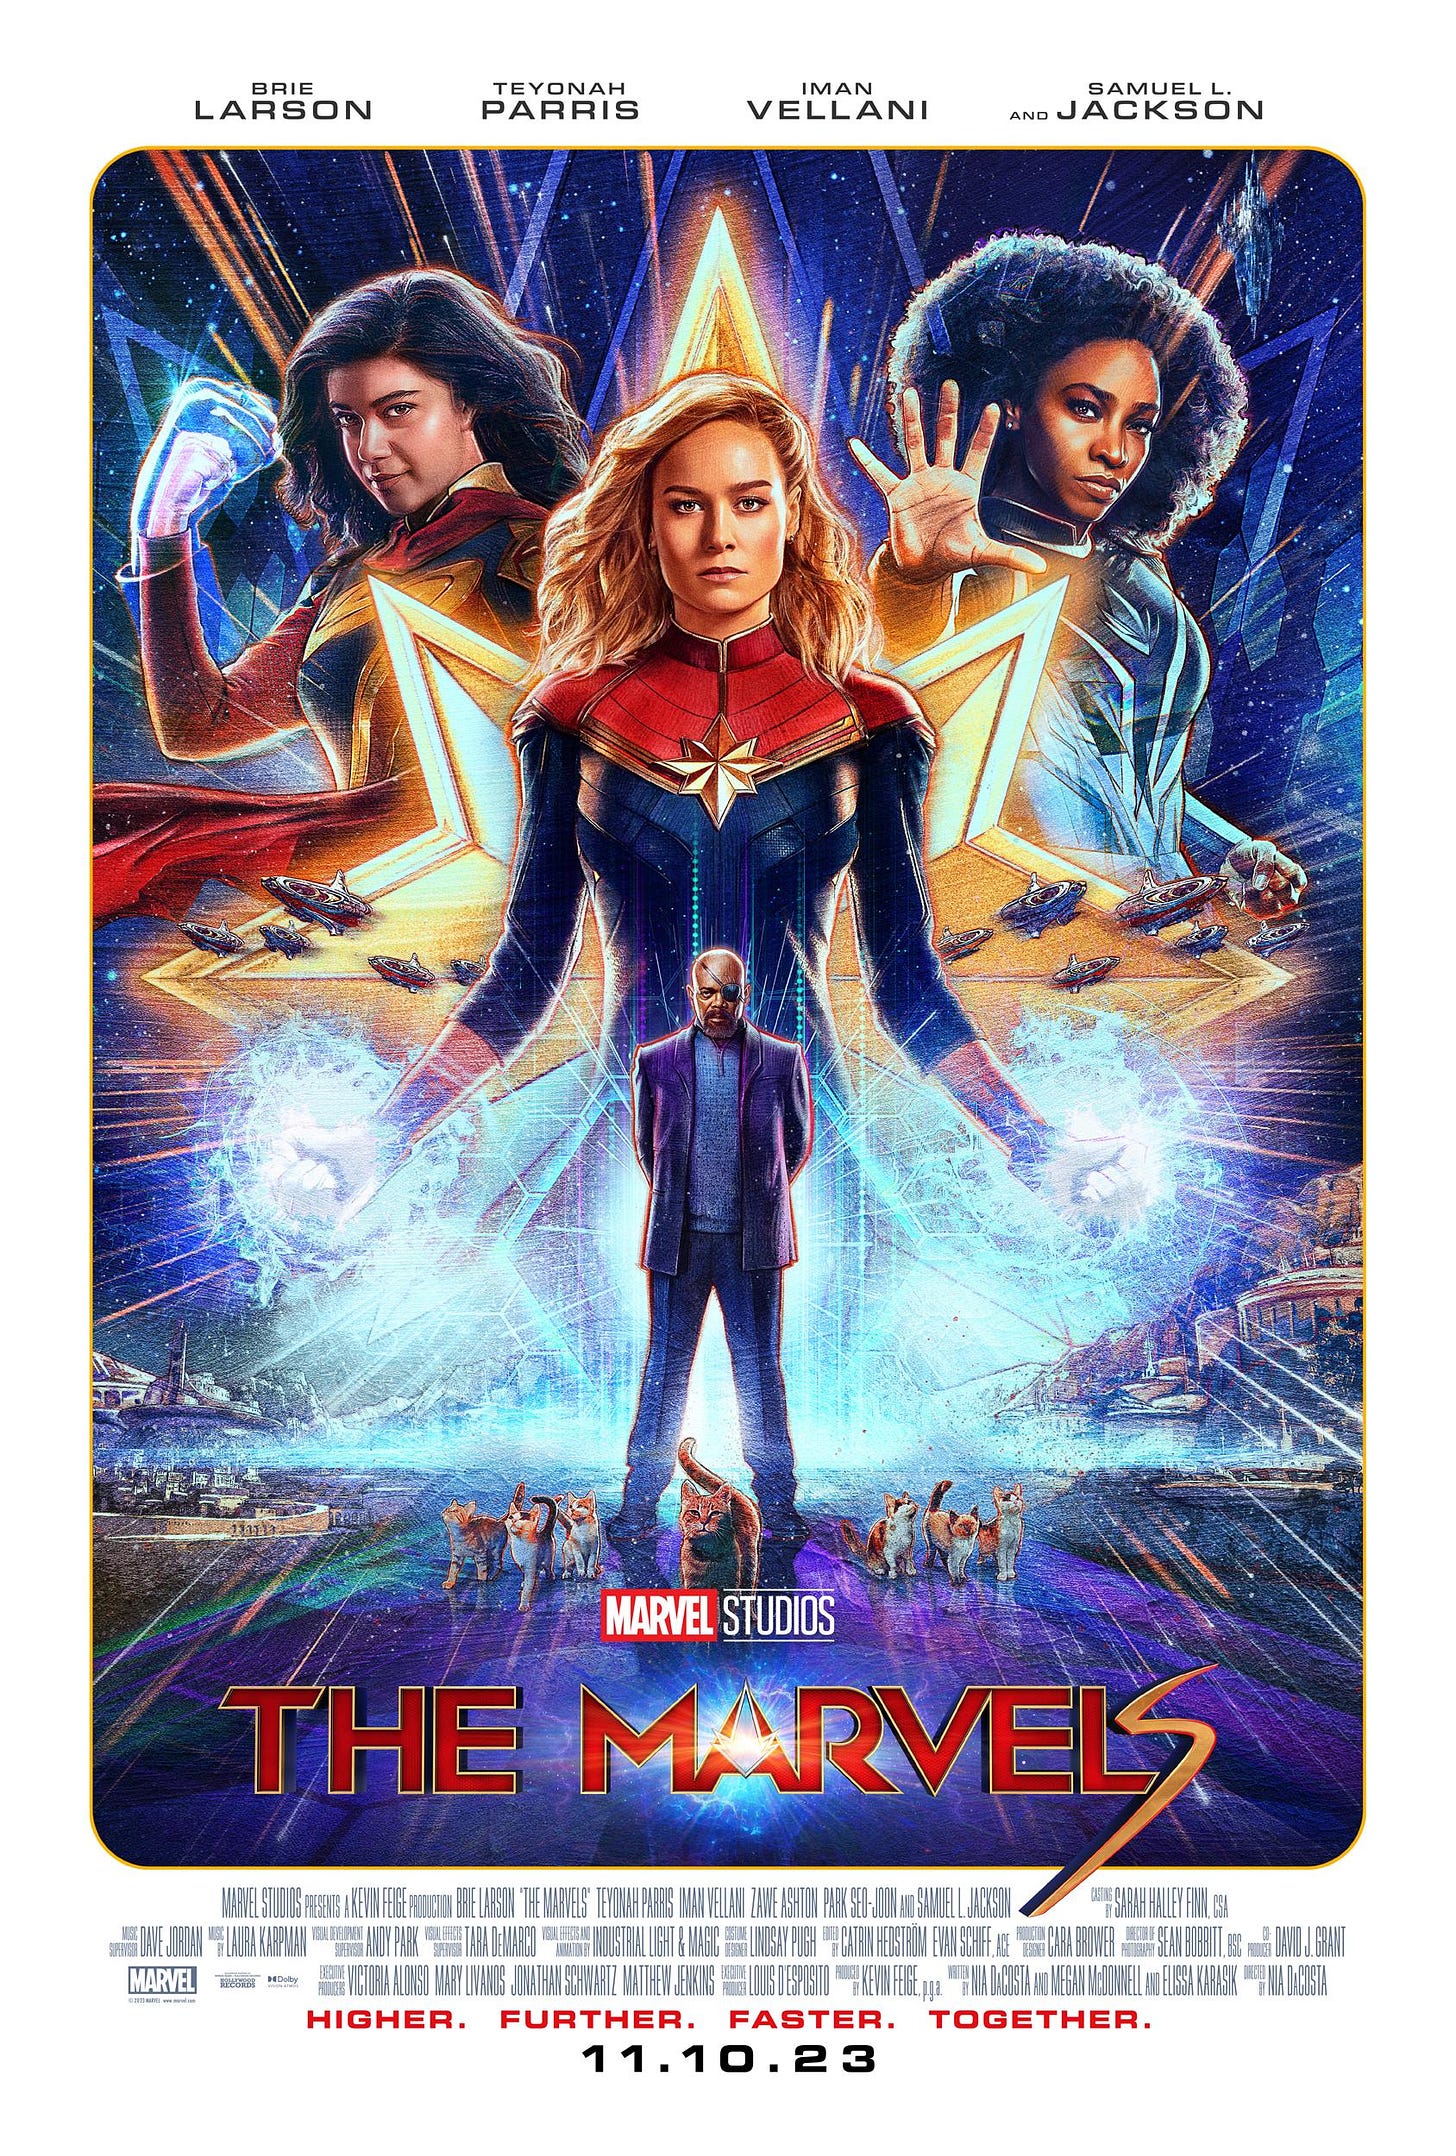 Brie Larson in the middle, arms out and charged with golden energy, Teyonah Parris to the right semi transparent, Iman Vellani to the left making a fist, Samuel L. Jackson beneath them all surrounded by cats